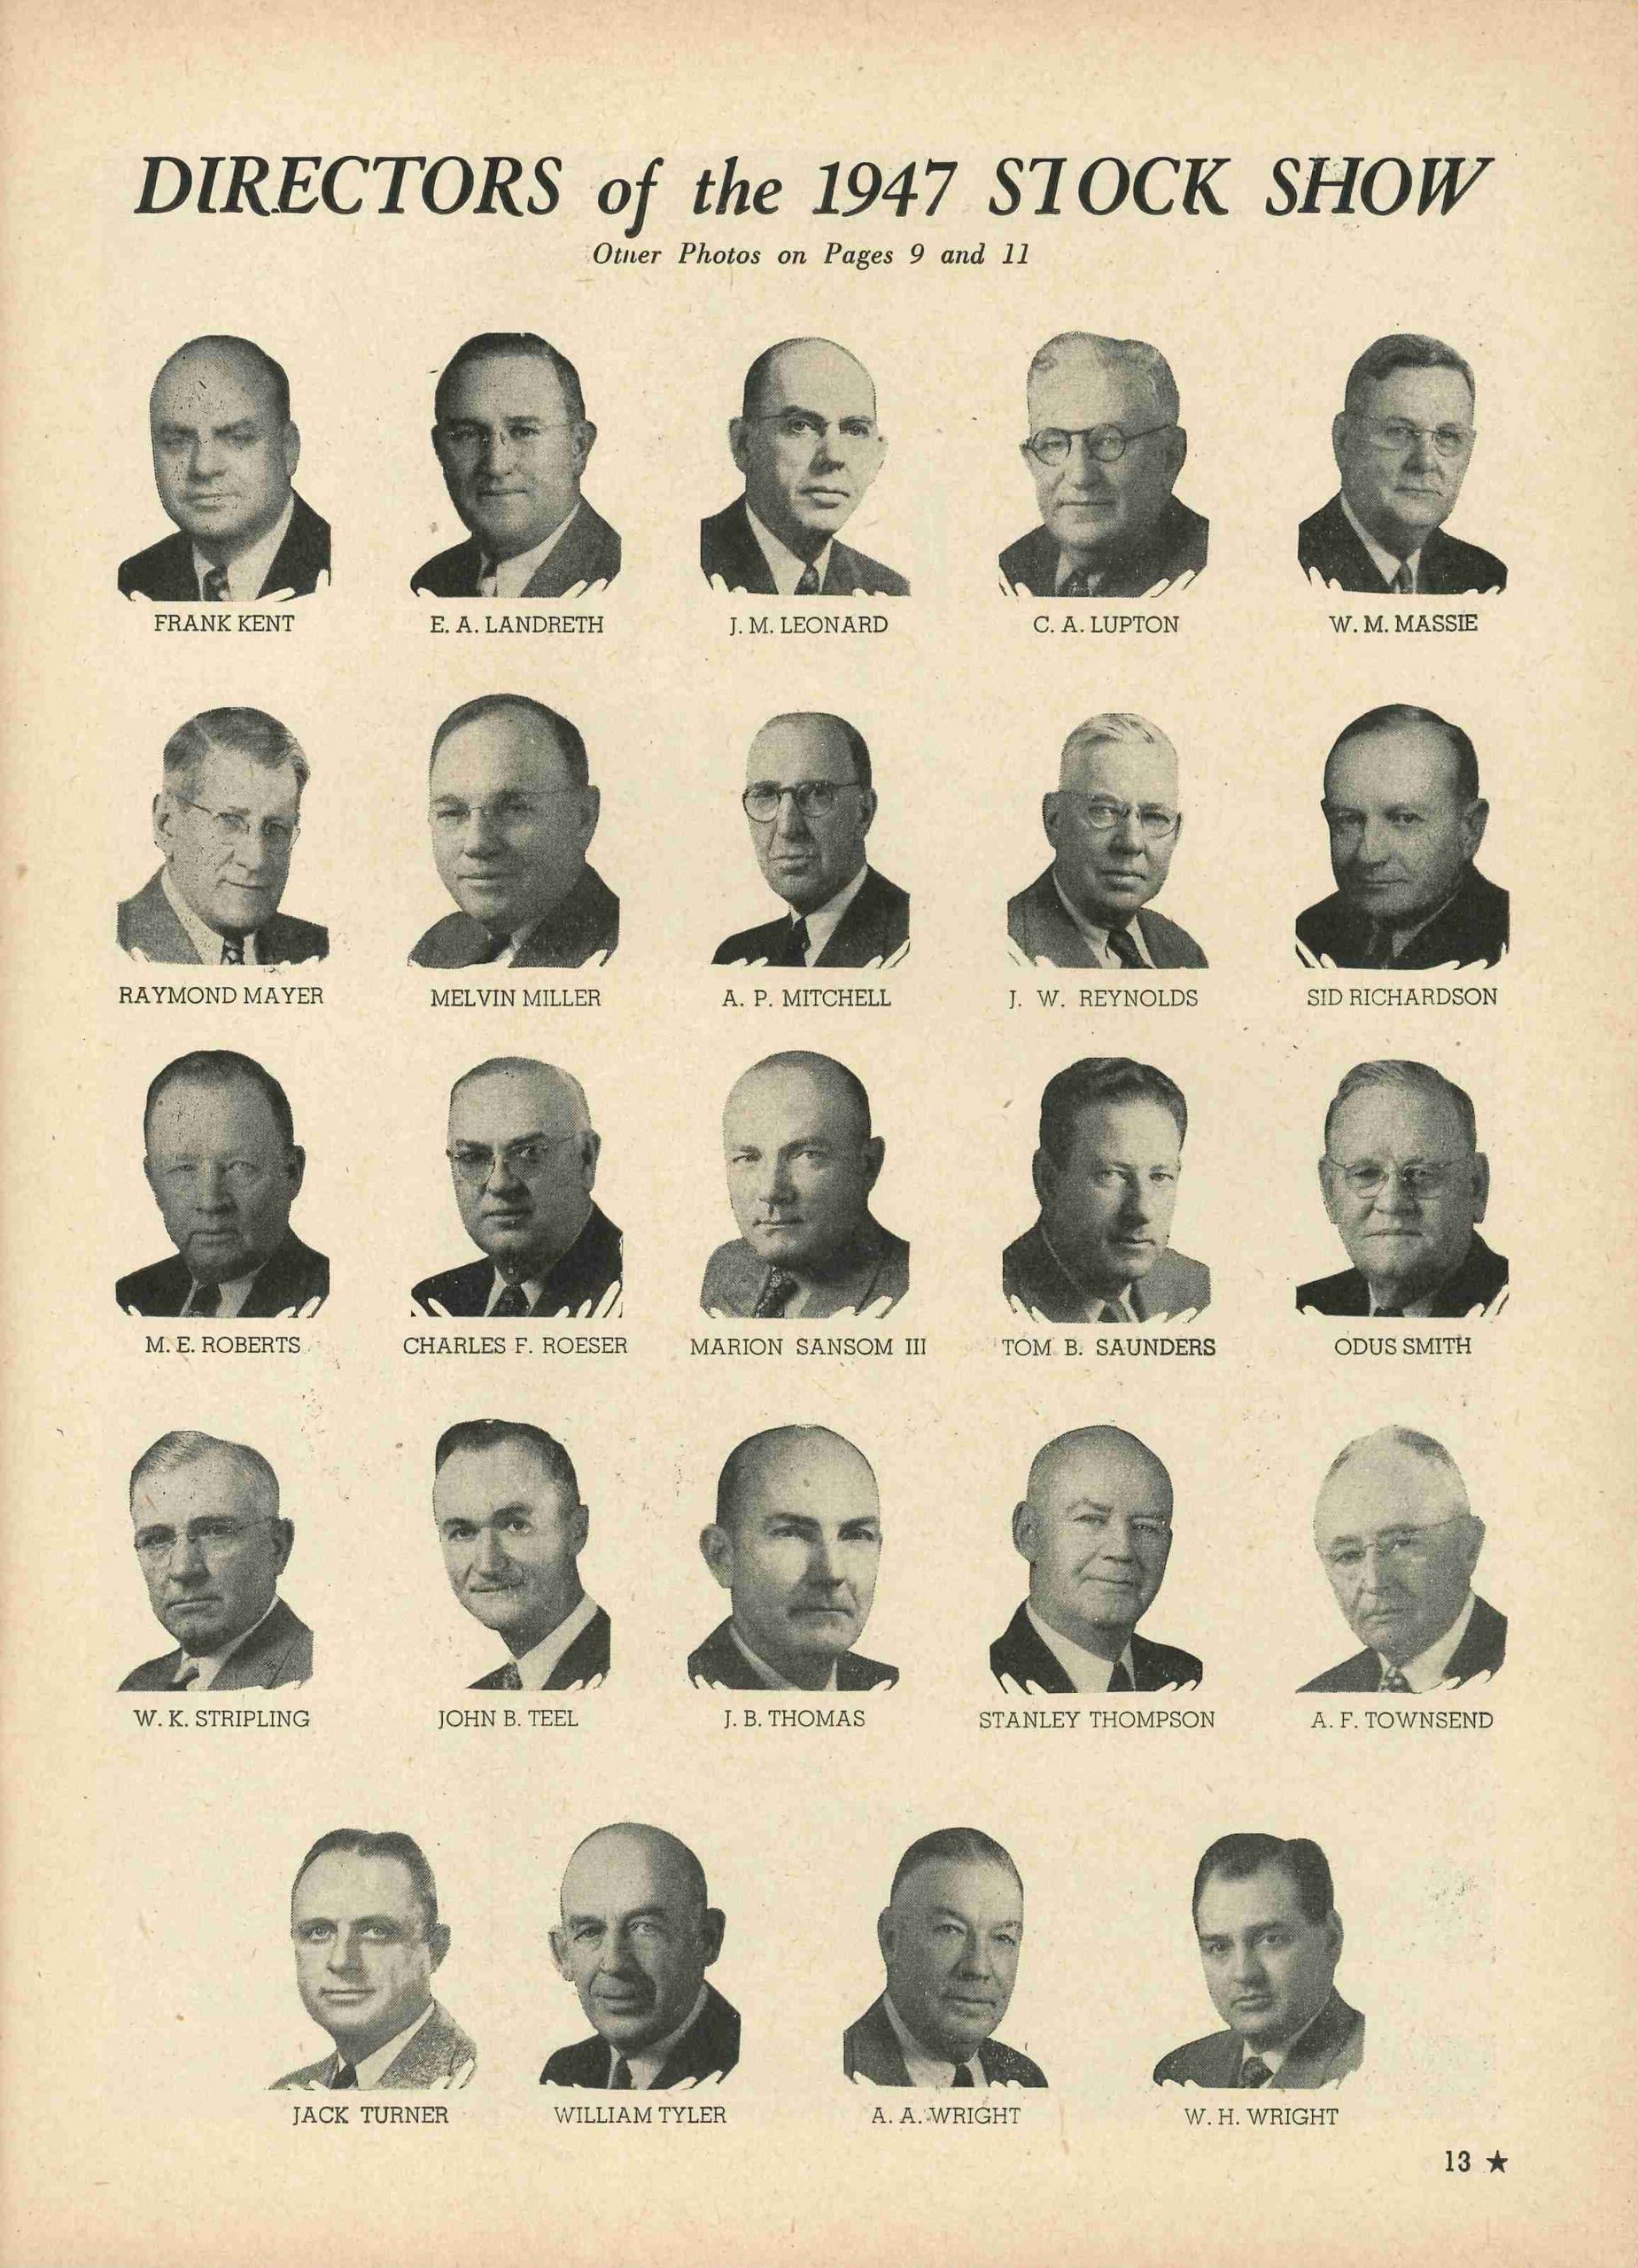 A page from the stock show annual displaying five rows of older, white men's portraits